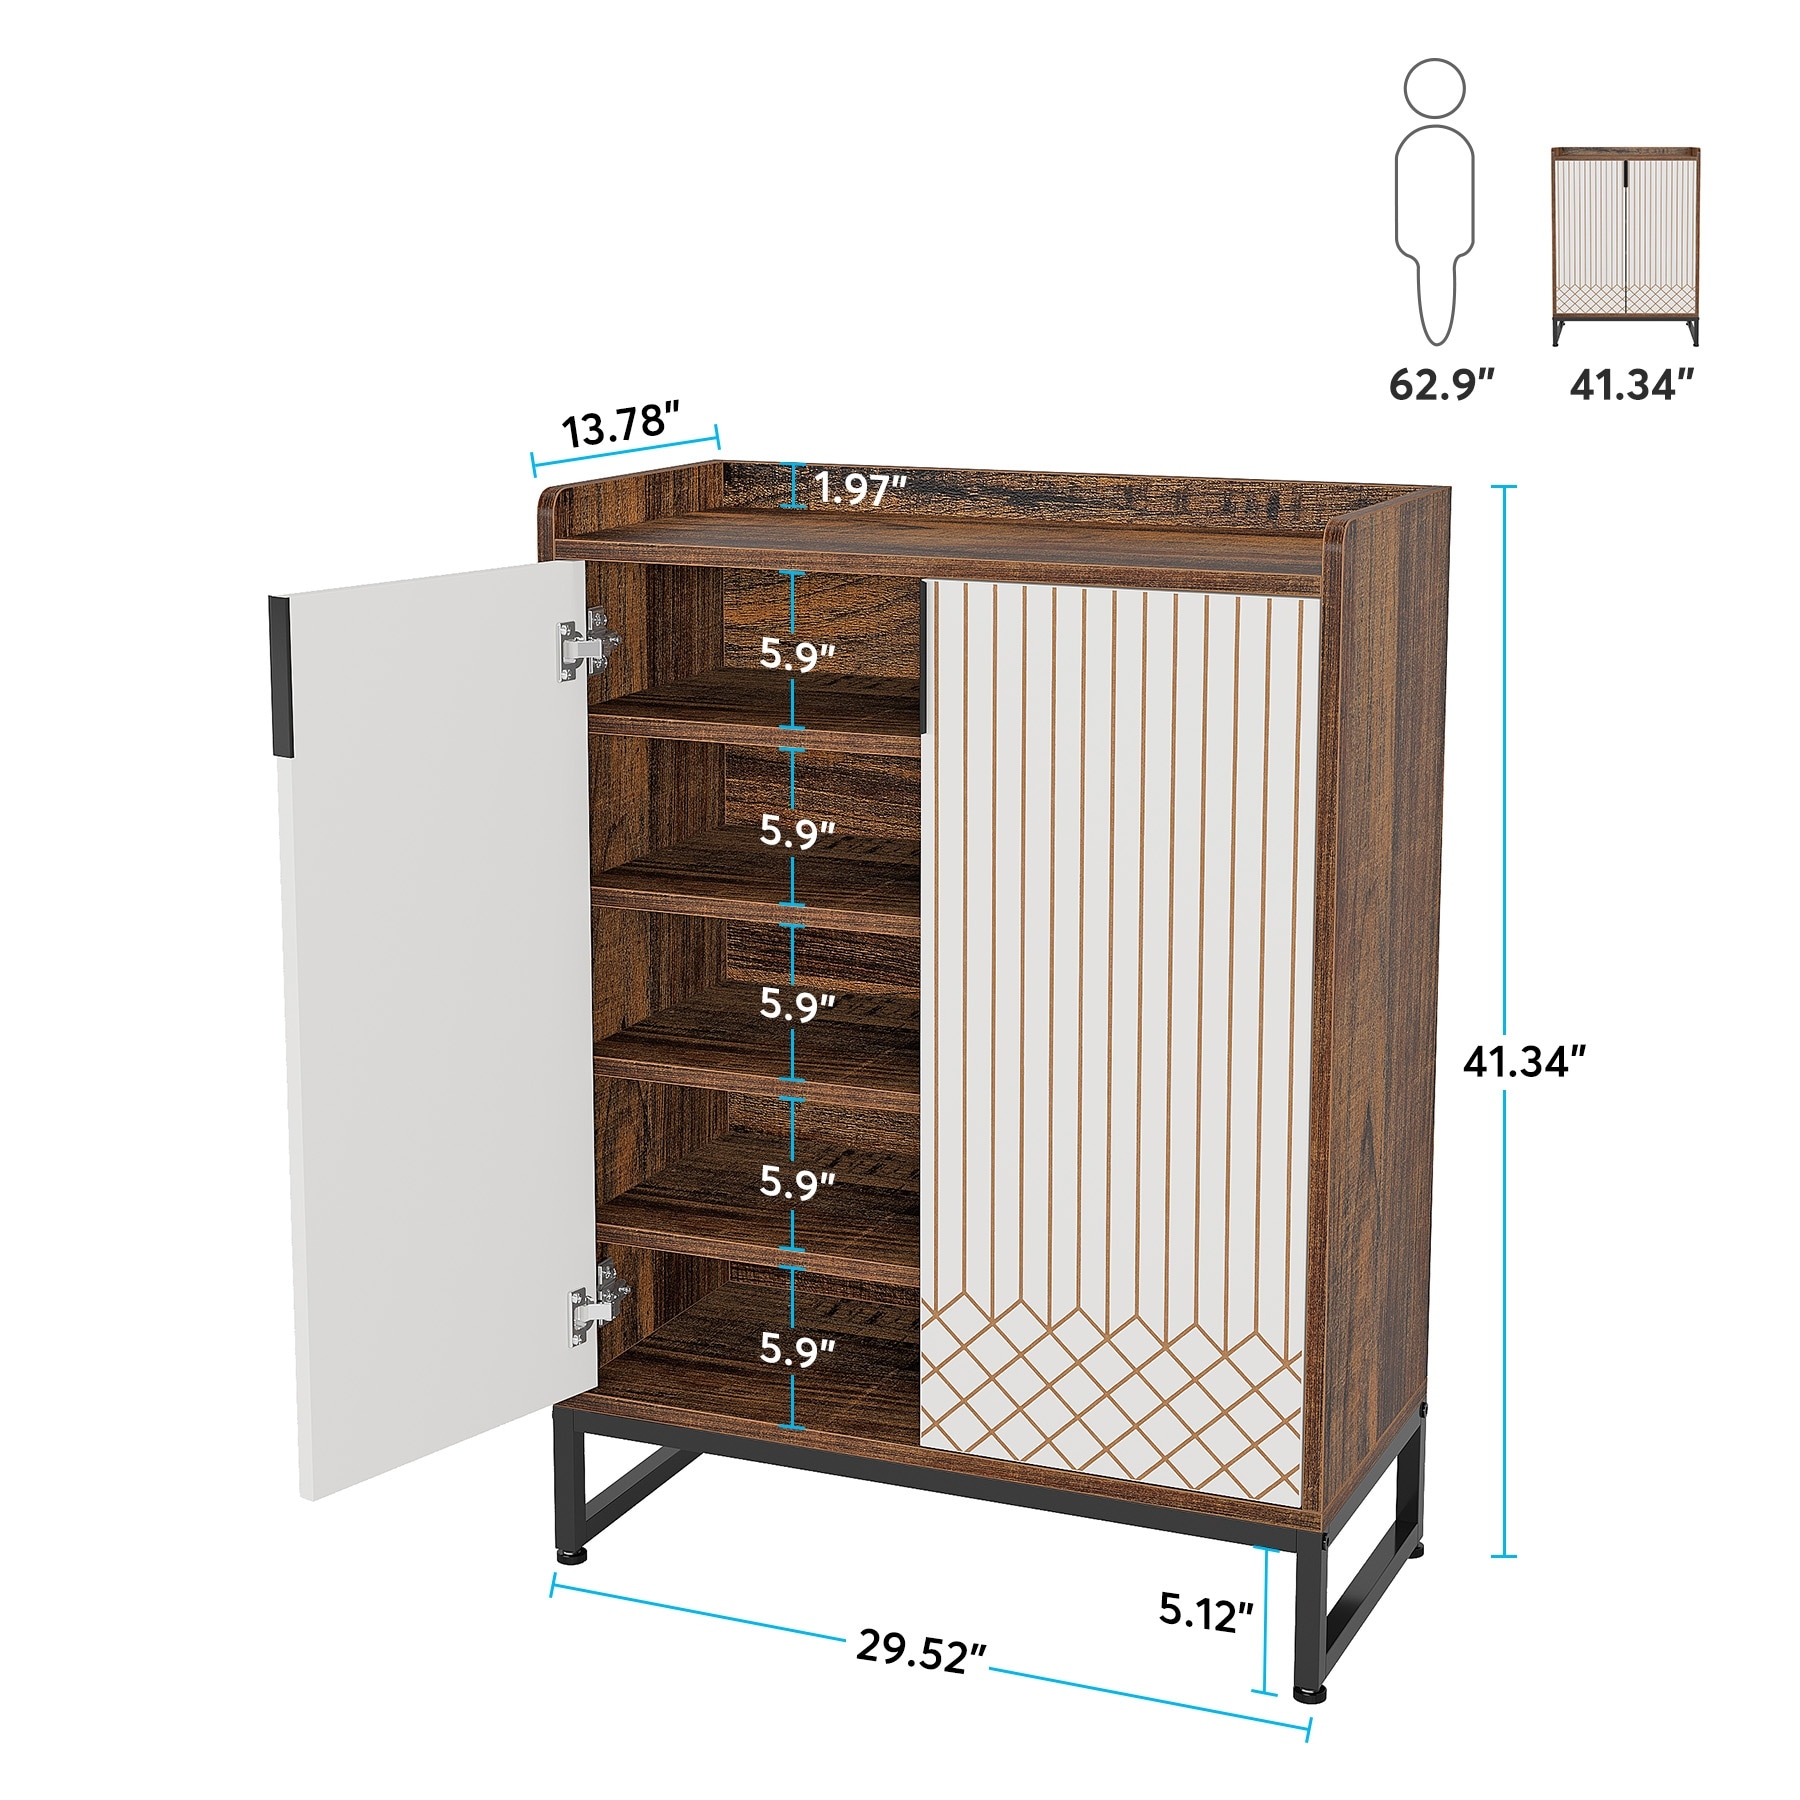 https://ak1.ostkcdn.com/images/products/is/images/direct/6981d7311d8295bf57821e327ff329e5f07726ef/25-Pairs-Shoe-Cabinet-with-Doors%2C-5-Tier-Shoes-Rack-for-Entryway.jpg